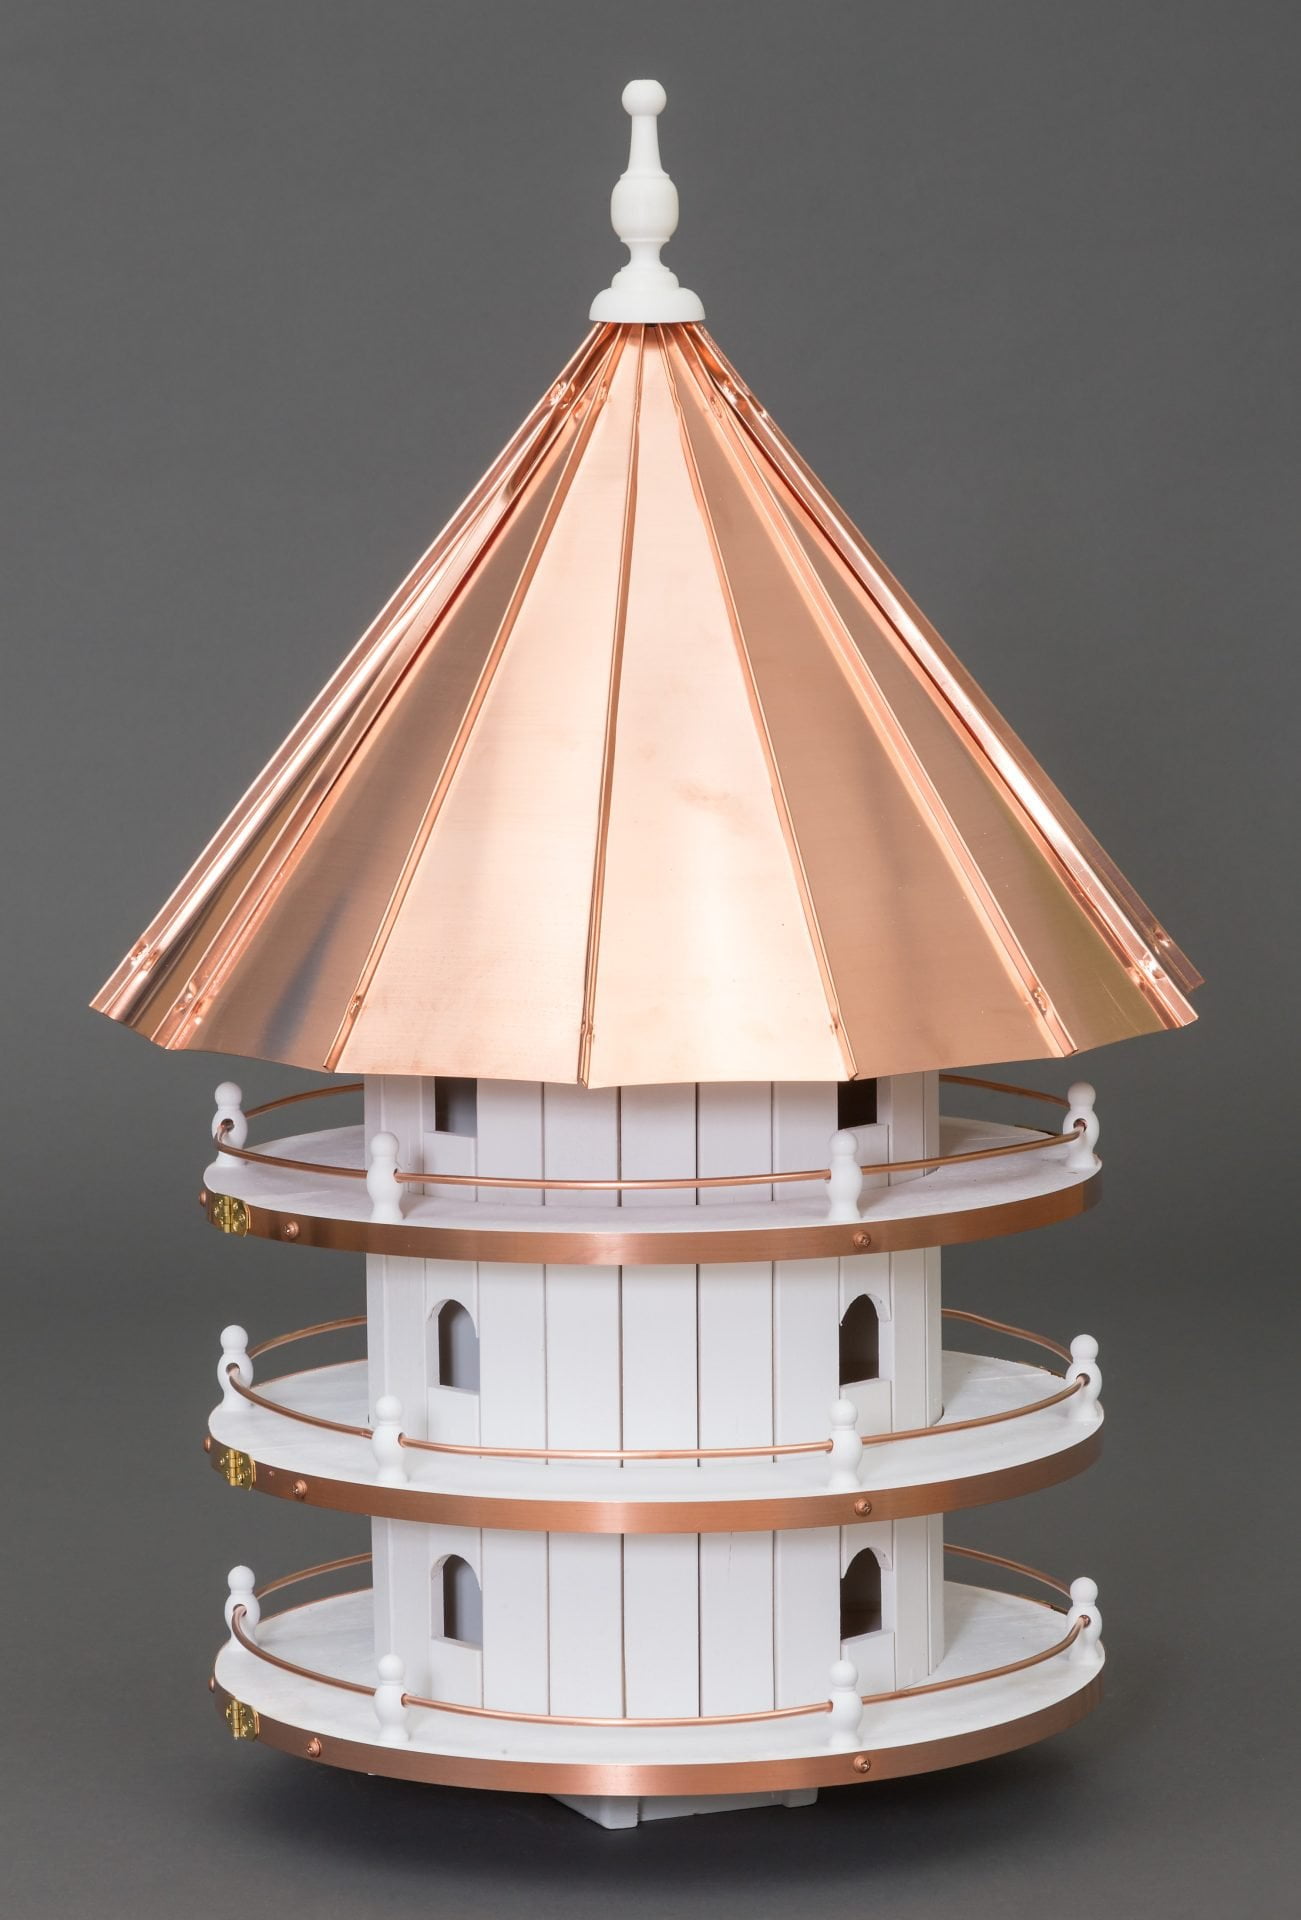 Round 12 Hole Martin House with Copper Roof